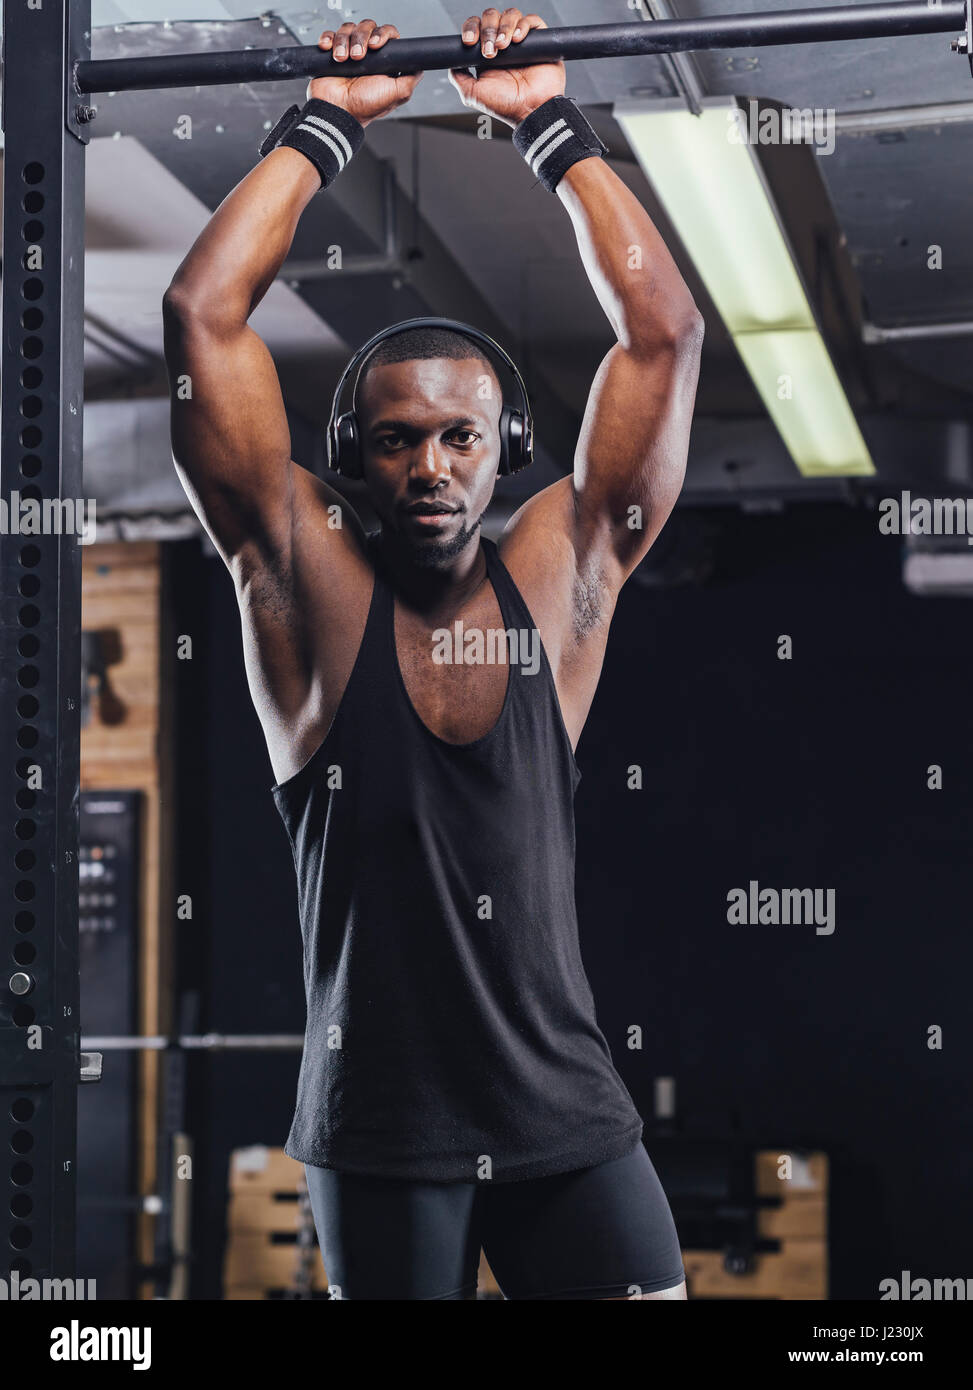 Athlete standing in gym, preparing for training Stock Photo